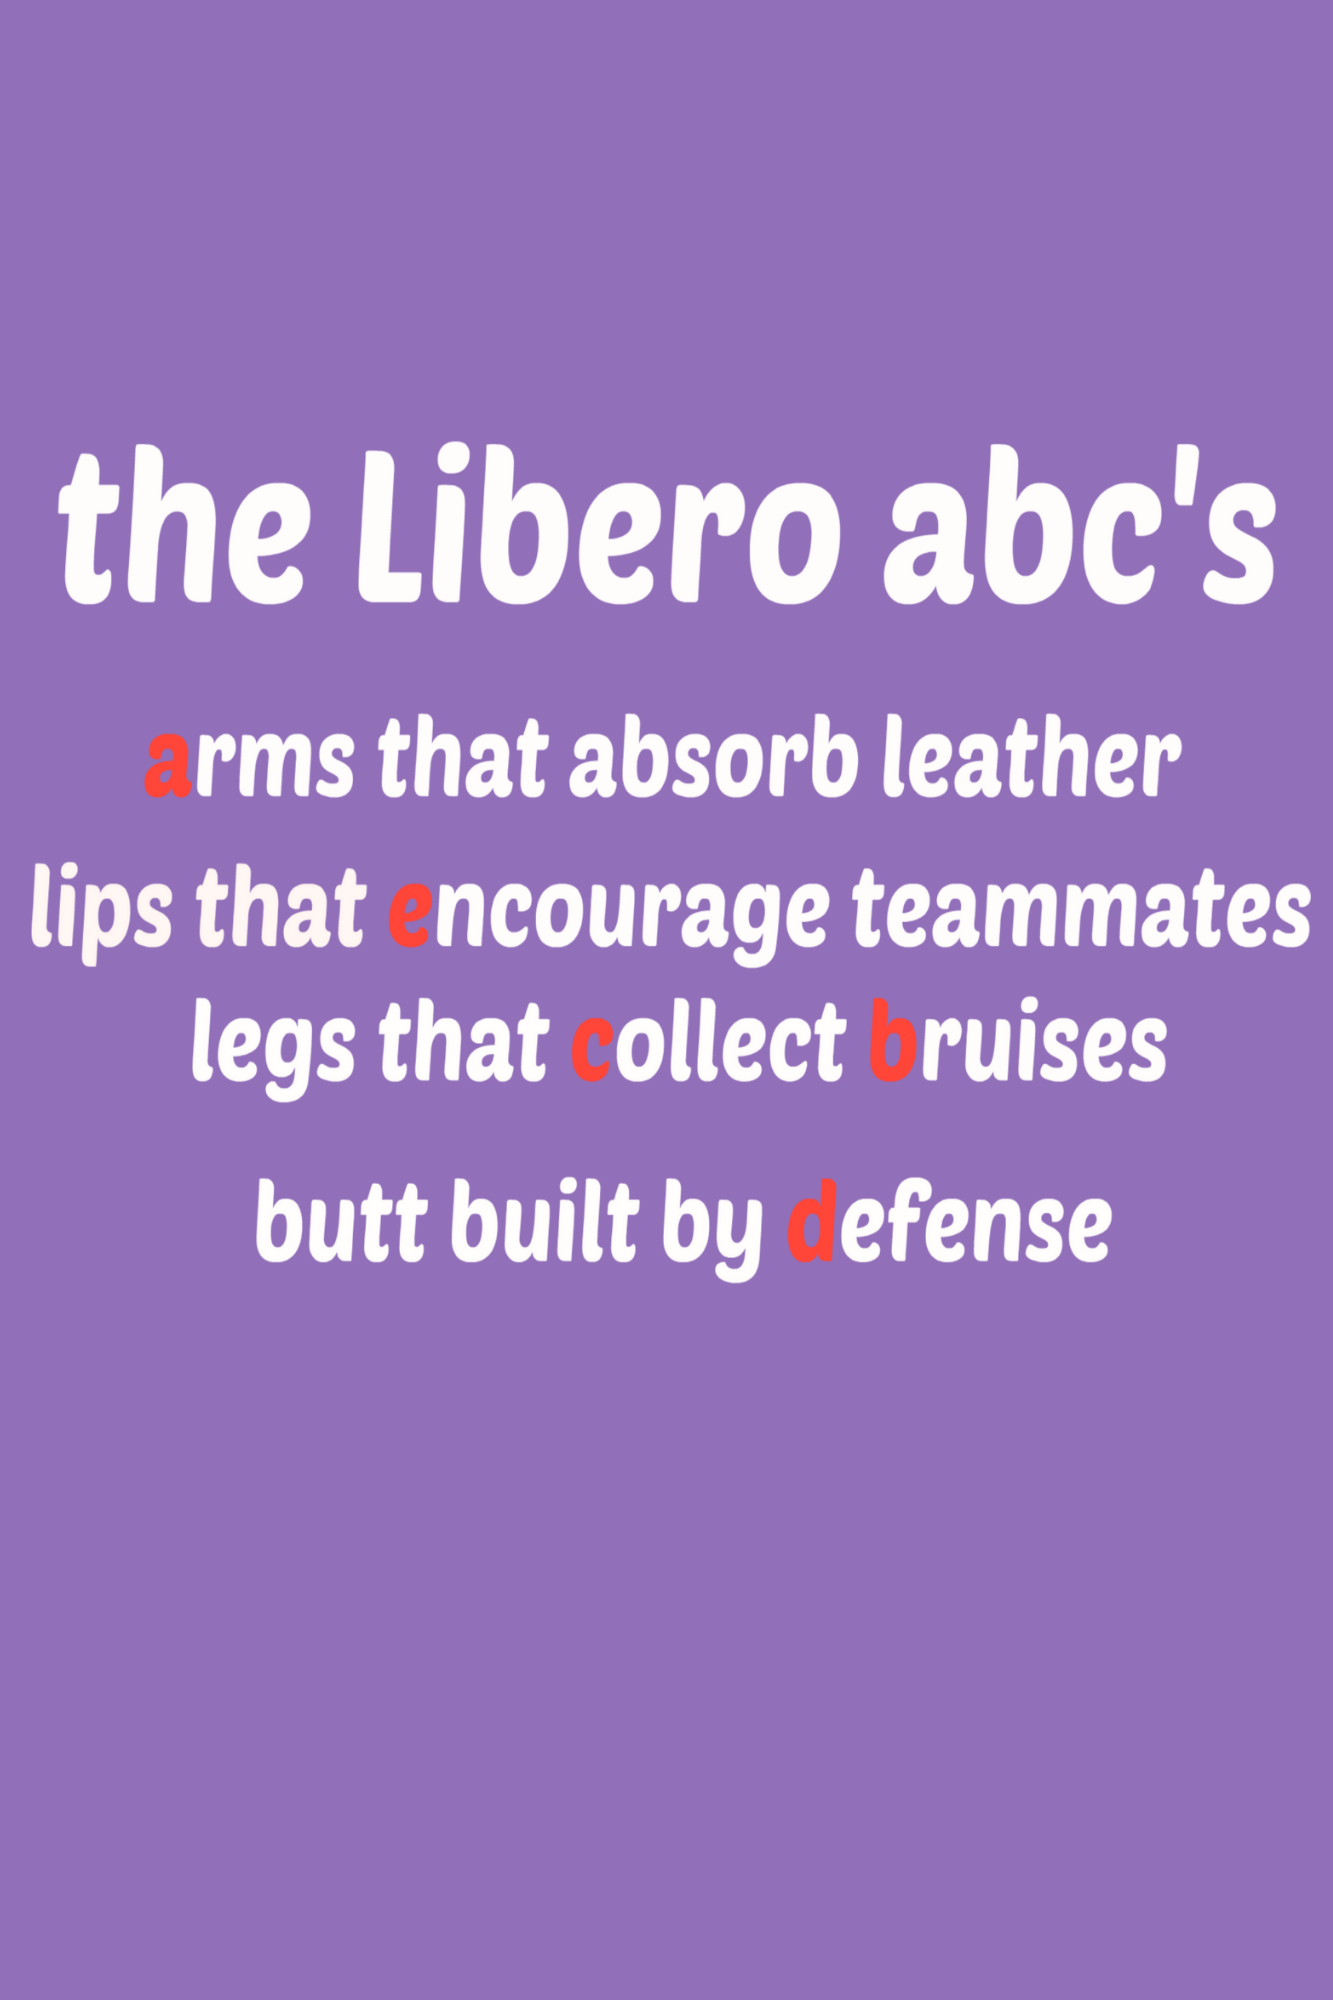 The LIBERO ABCs      
arms that absorb leather
lips that encourage teammates
legs that collect bruises
butt built by defense